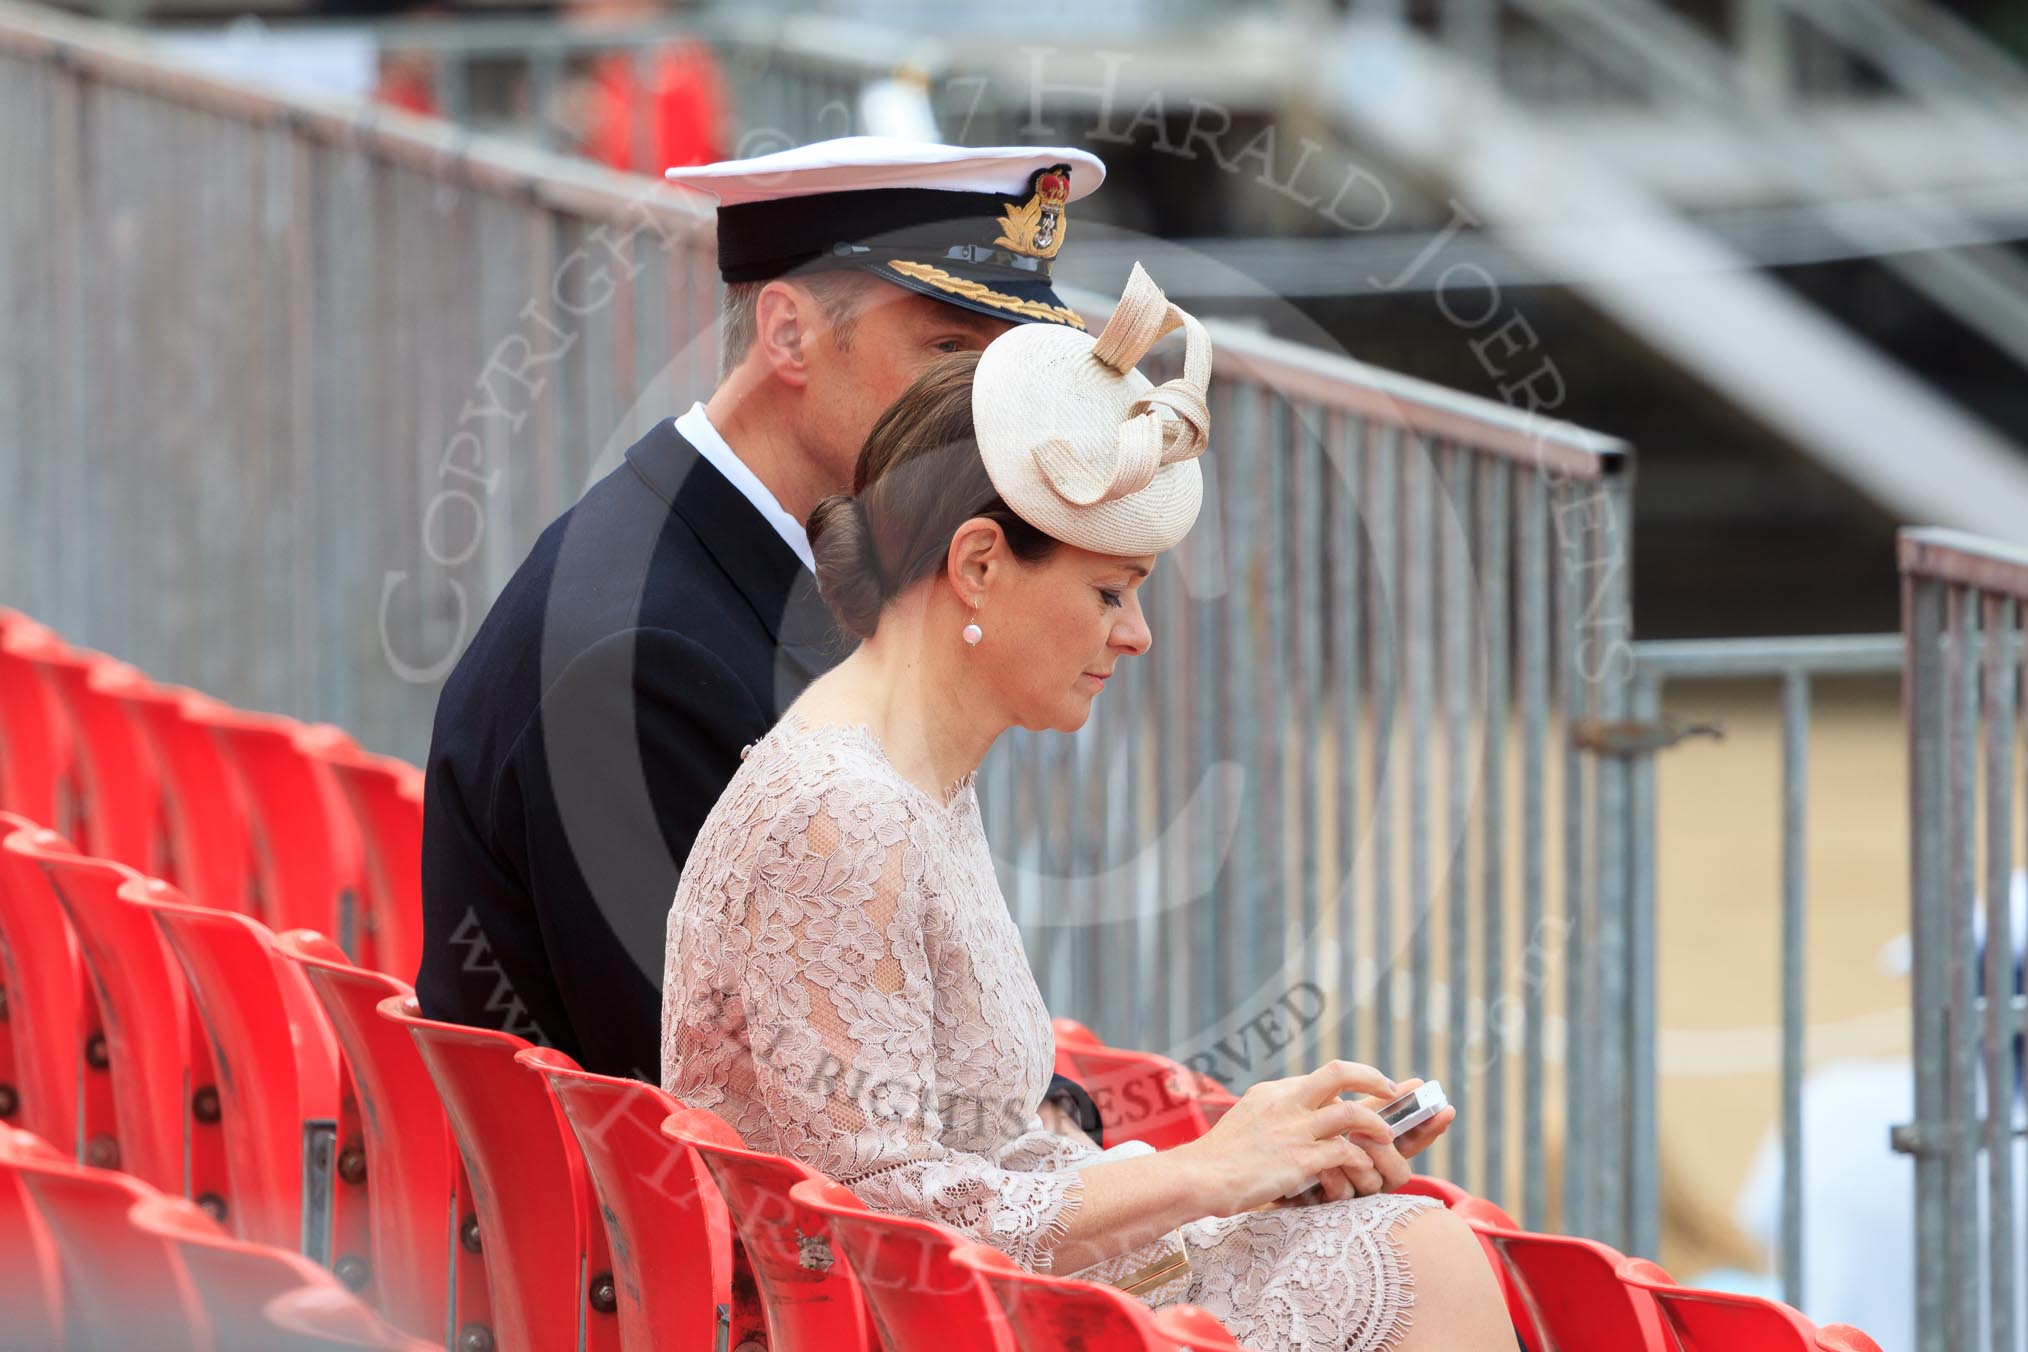 Royal Navy Officer with his wife before Trooping the Colour 2018, The Queen's Birthday Parade at Horse Guards Parade, Westminster, London, 9 June 2018, 09:09.